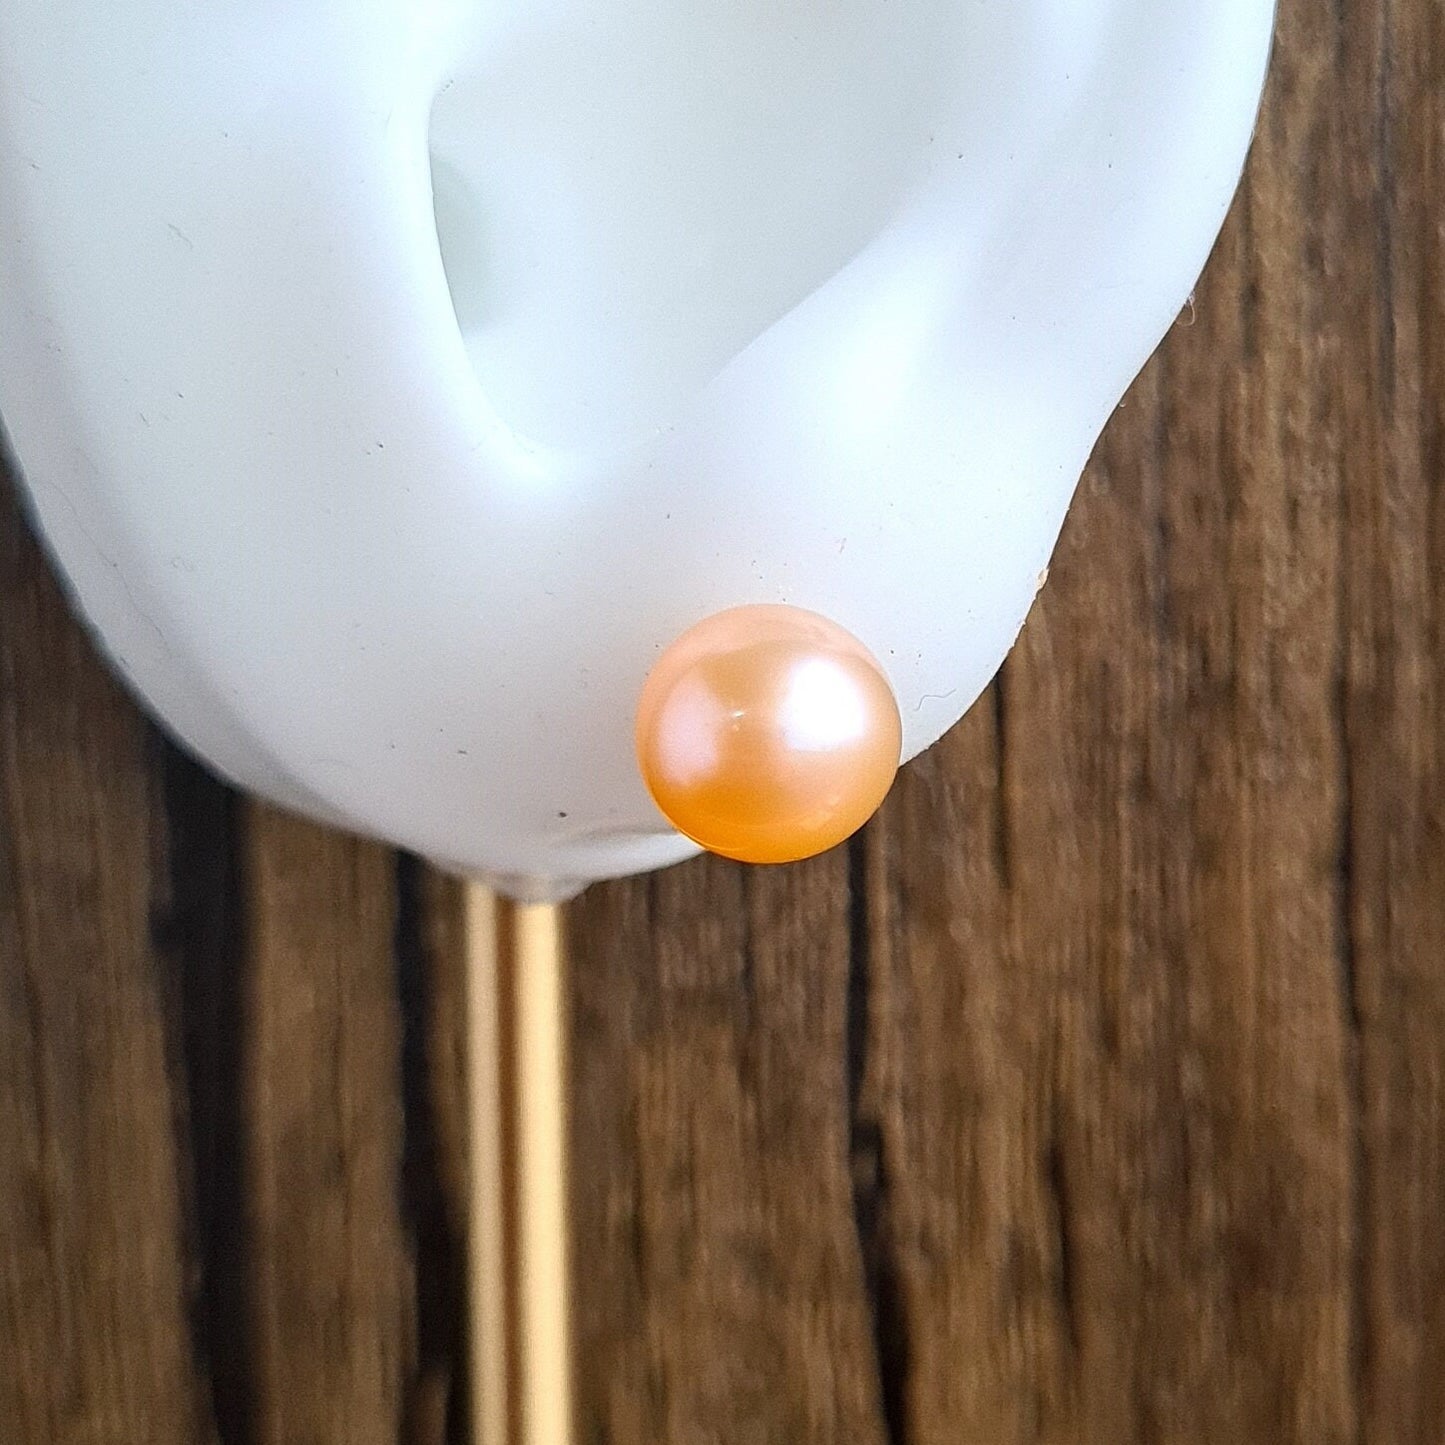 AAA quality 7.5 to 8 mm Almost Round Fresh Water Pearl with Gold filled Ear Stud